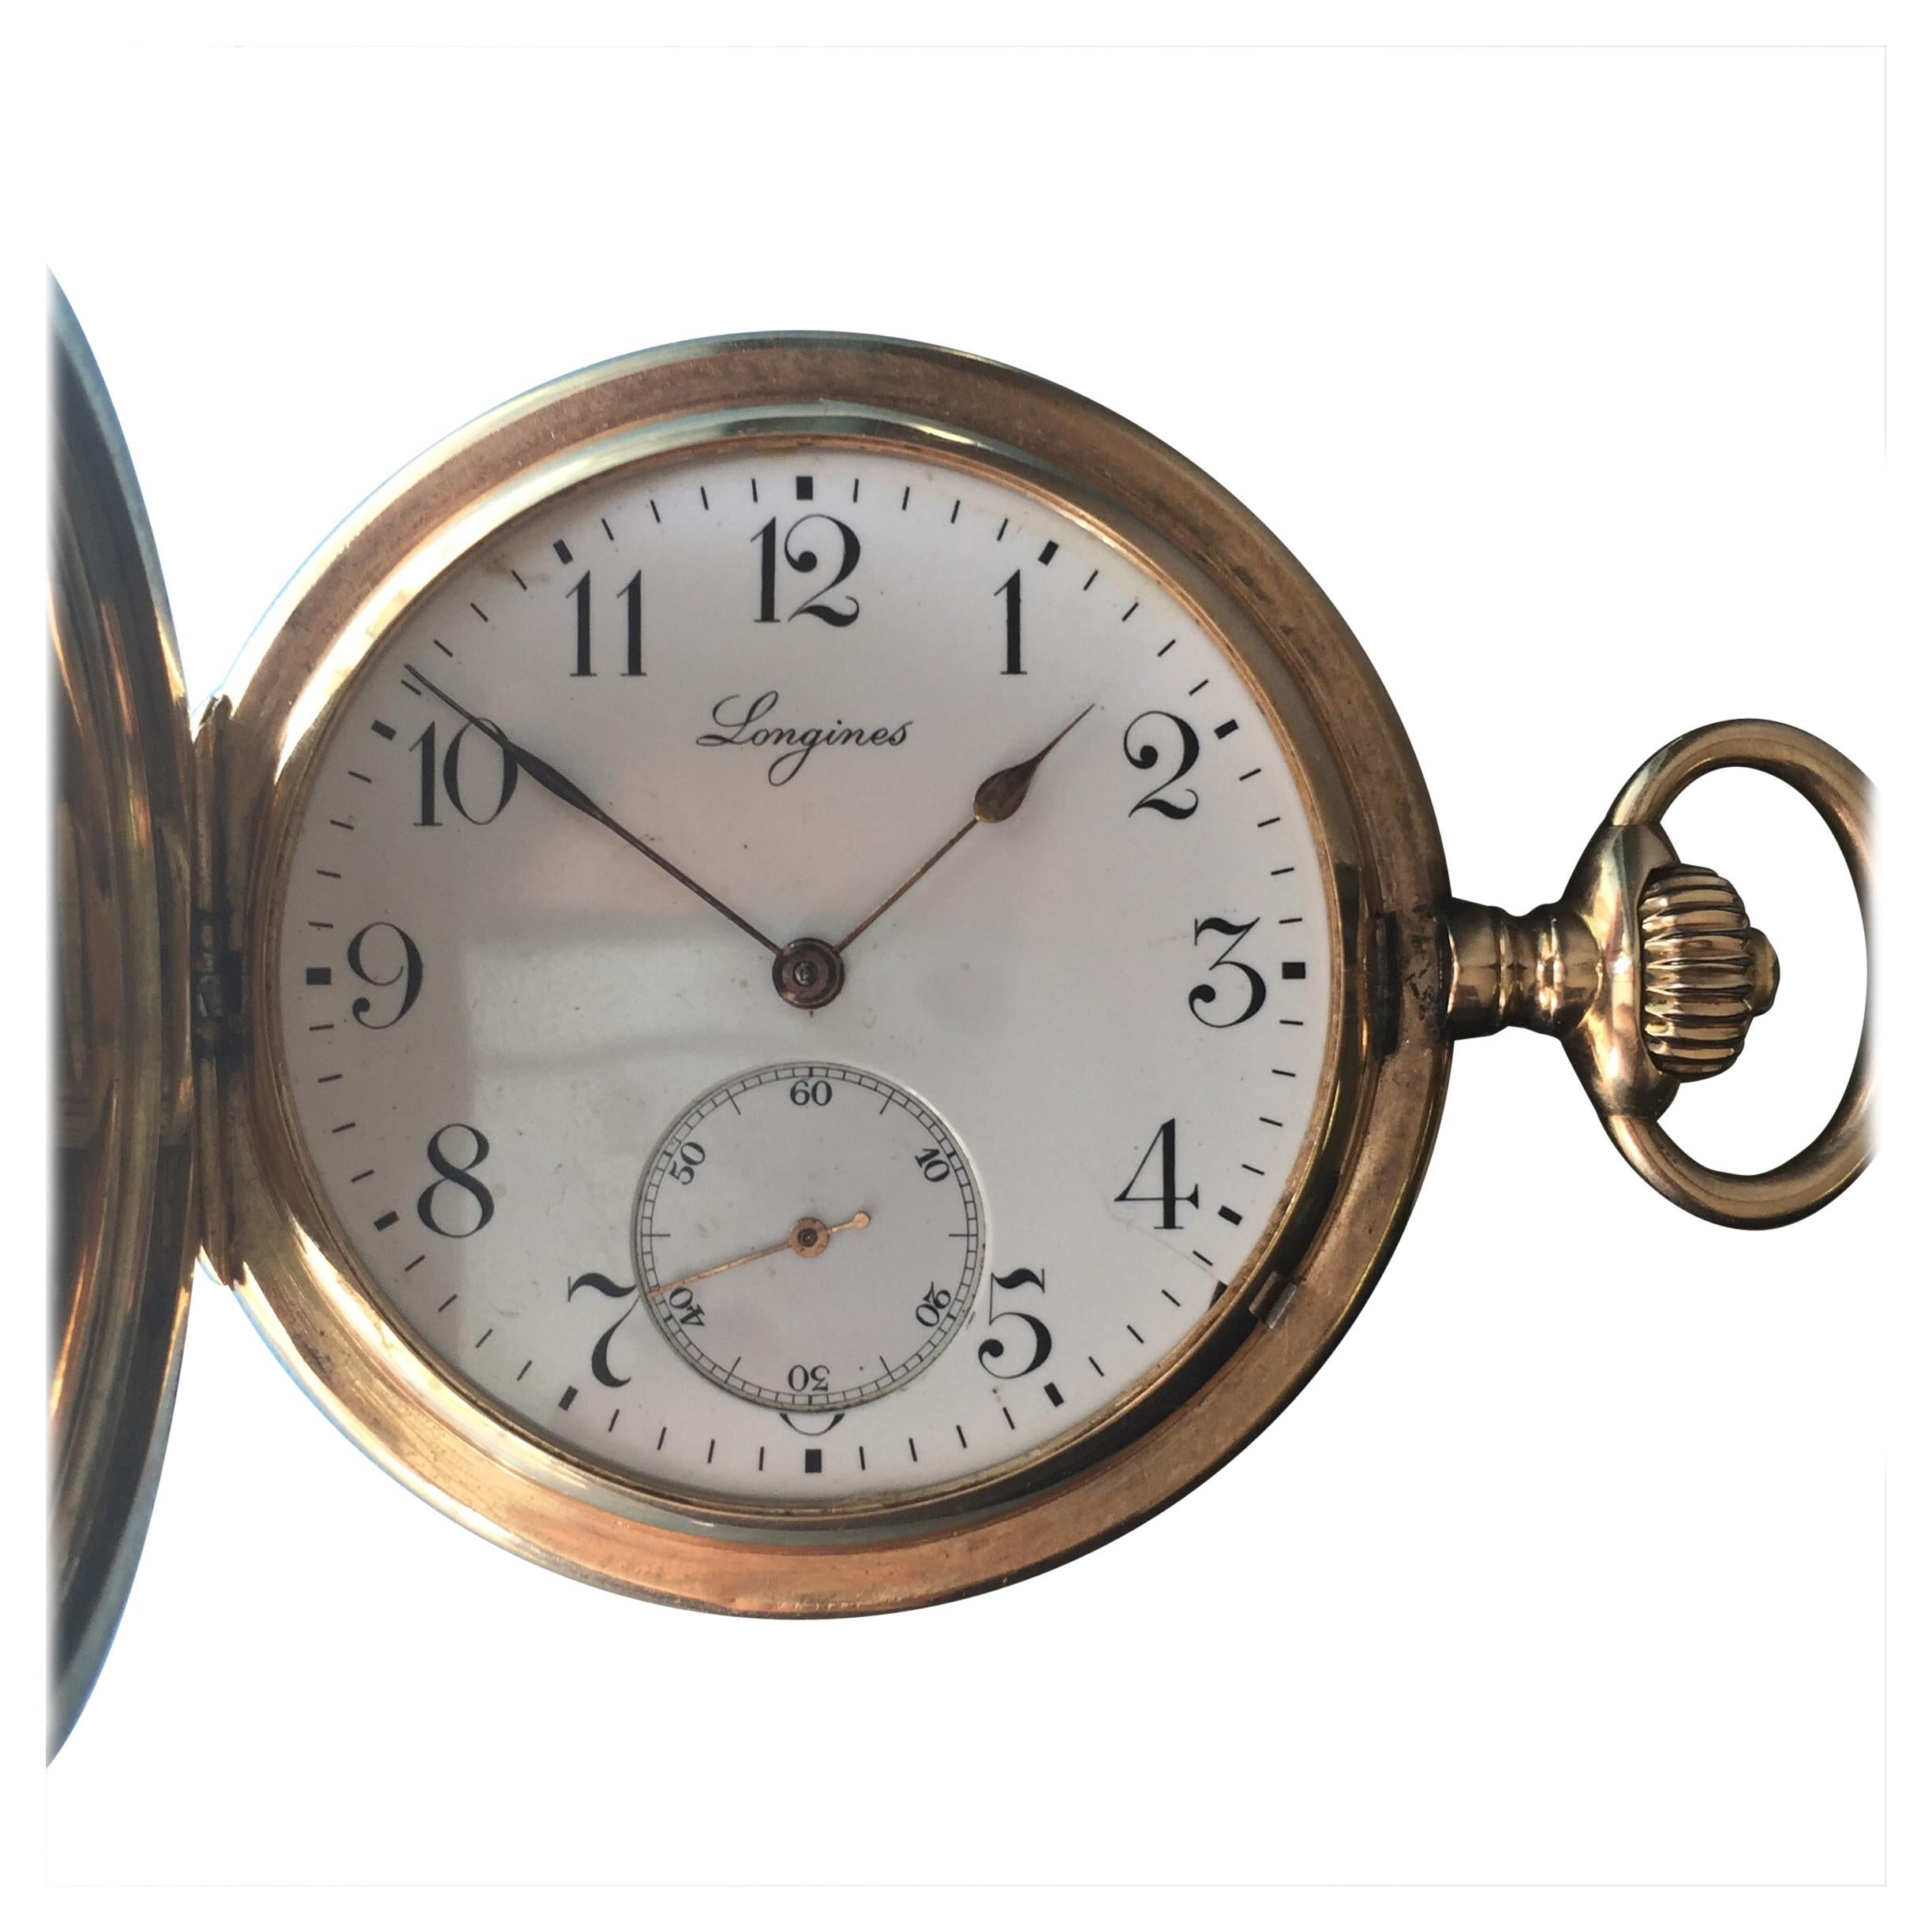 Longines Antique Pocket Watch 14 Karat Yellow, Solid Gold 1910 Grand Prix For Sale